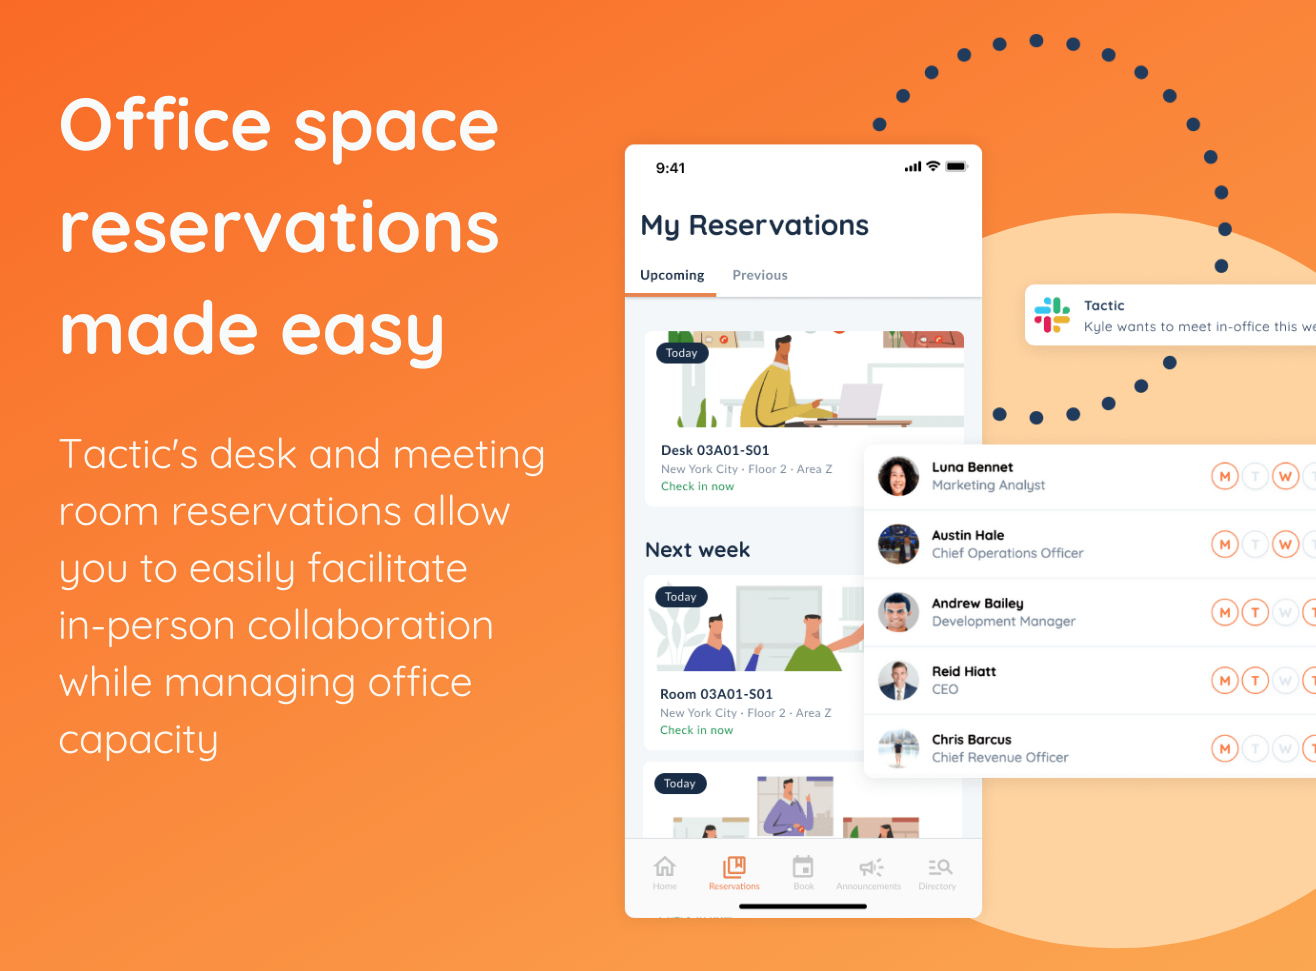 Office space reservations made easy